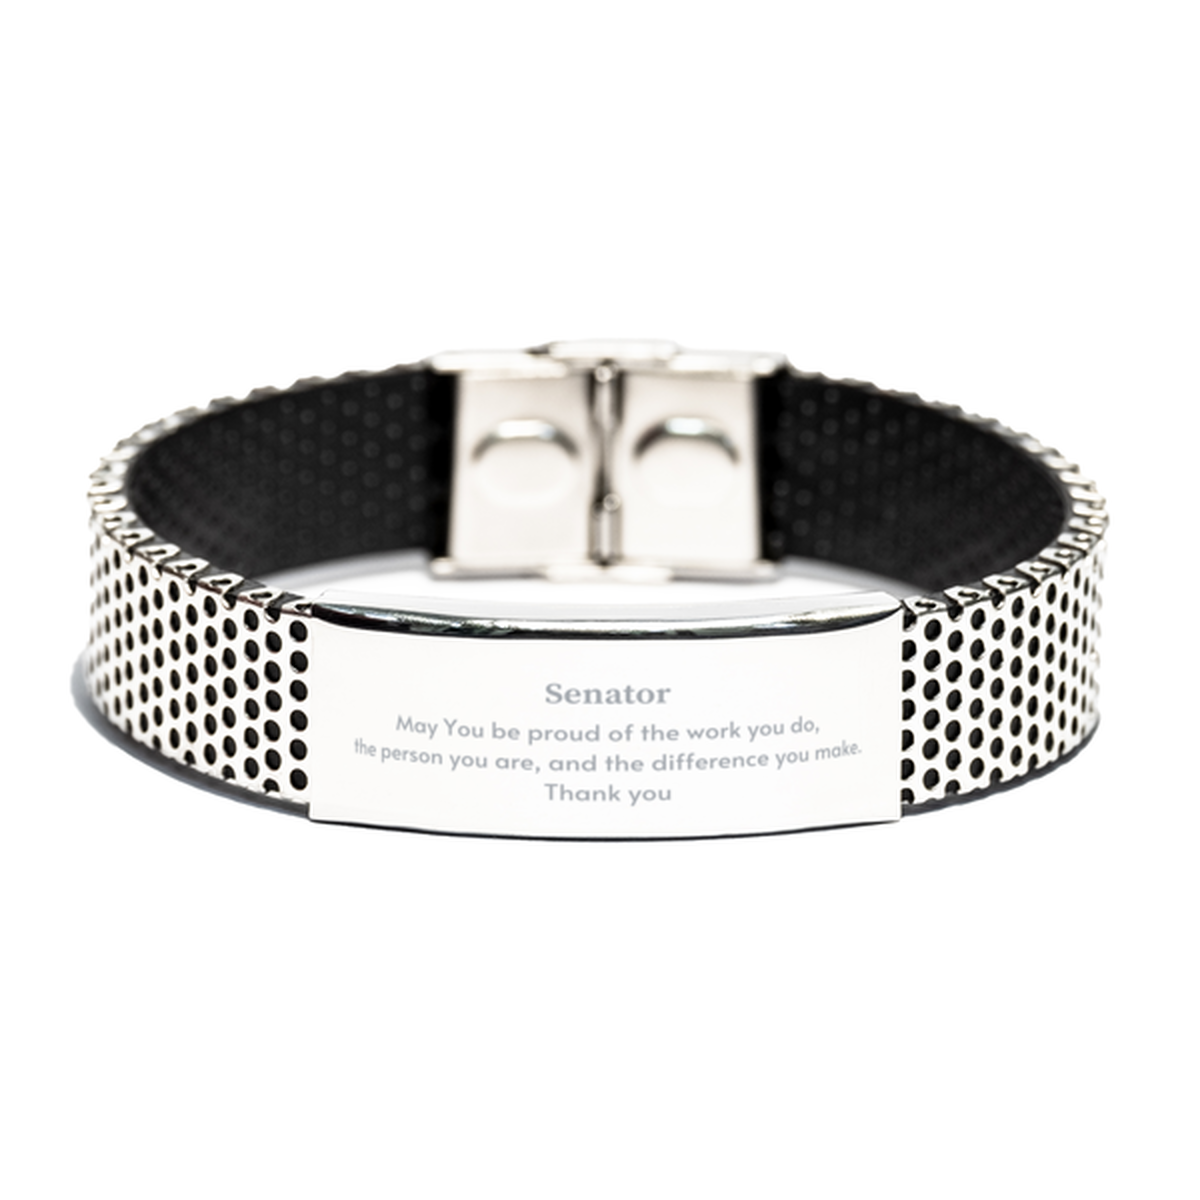 Heartwarming Stainless Steel Bracelet Retirement Coworkers Gifts for Senator, Senator May You be proud of the work you do, the person you are Gifts for Boss Men Women Friends